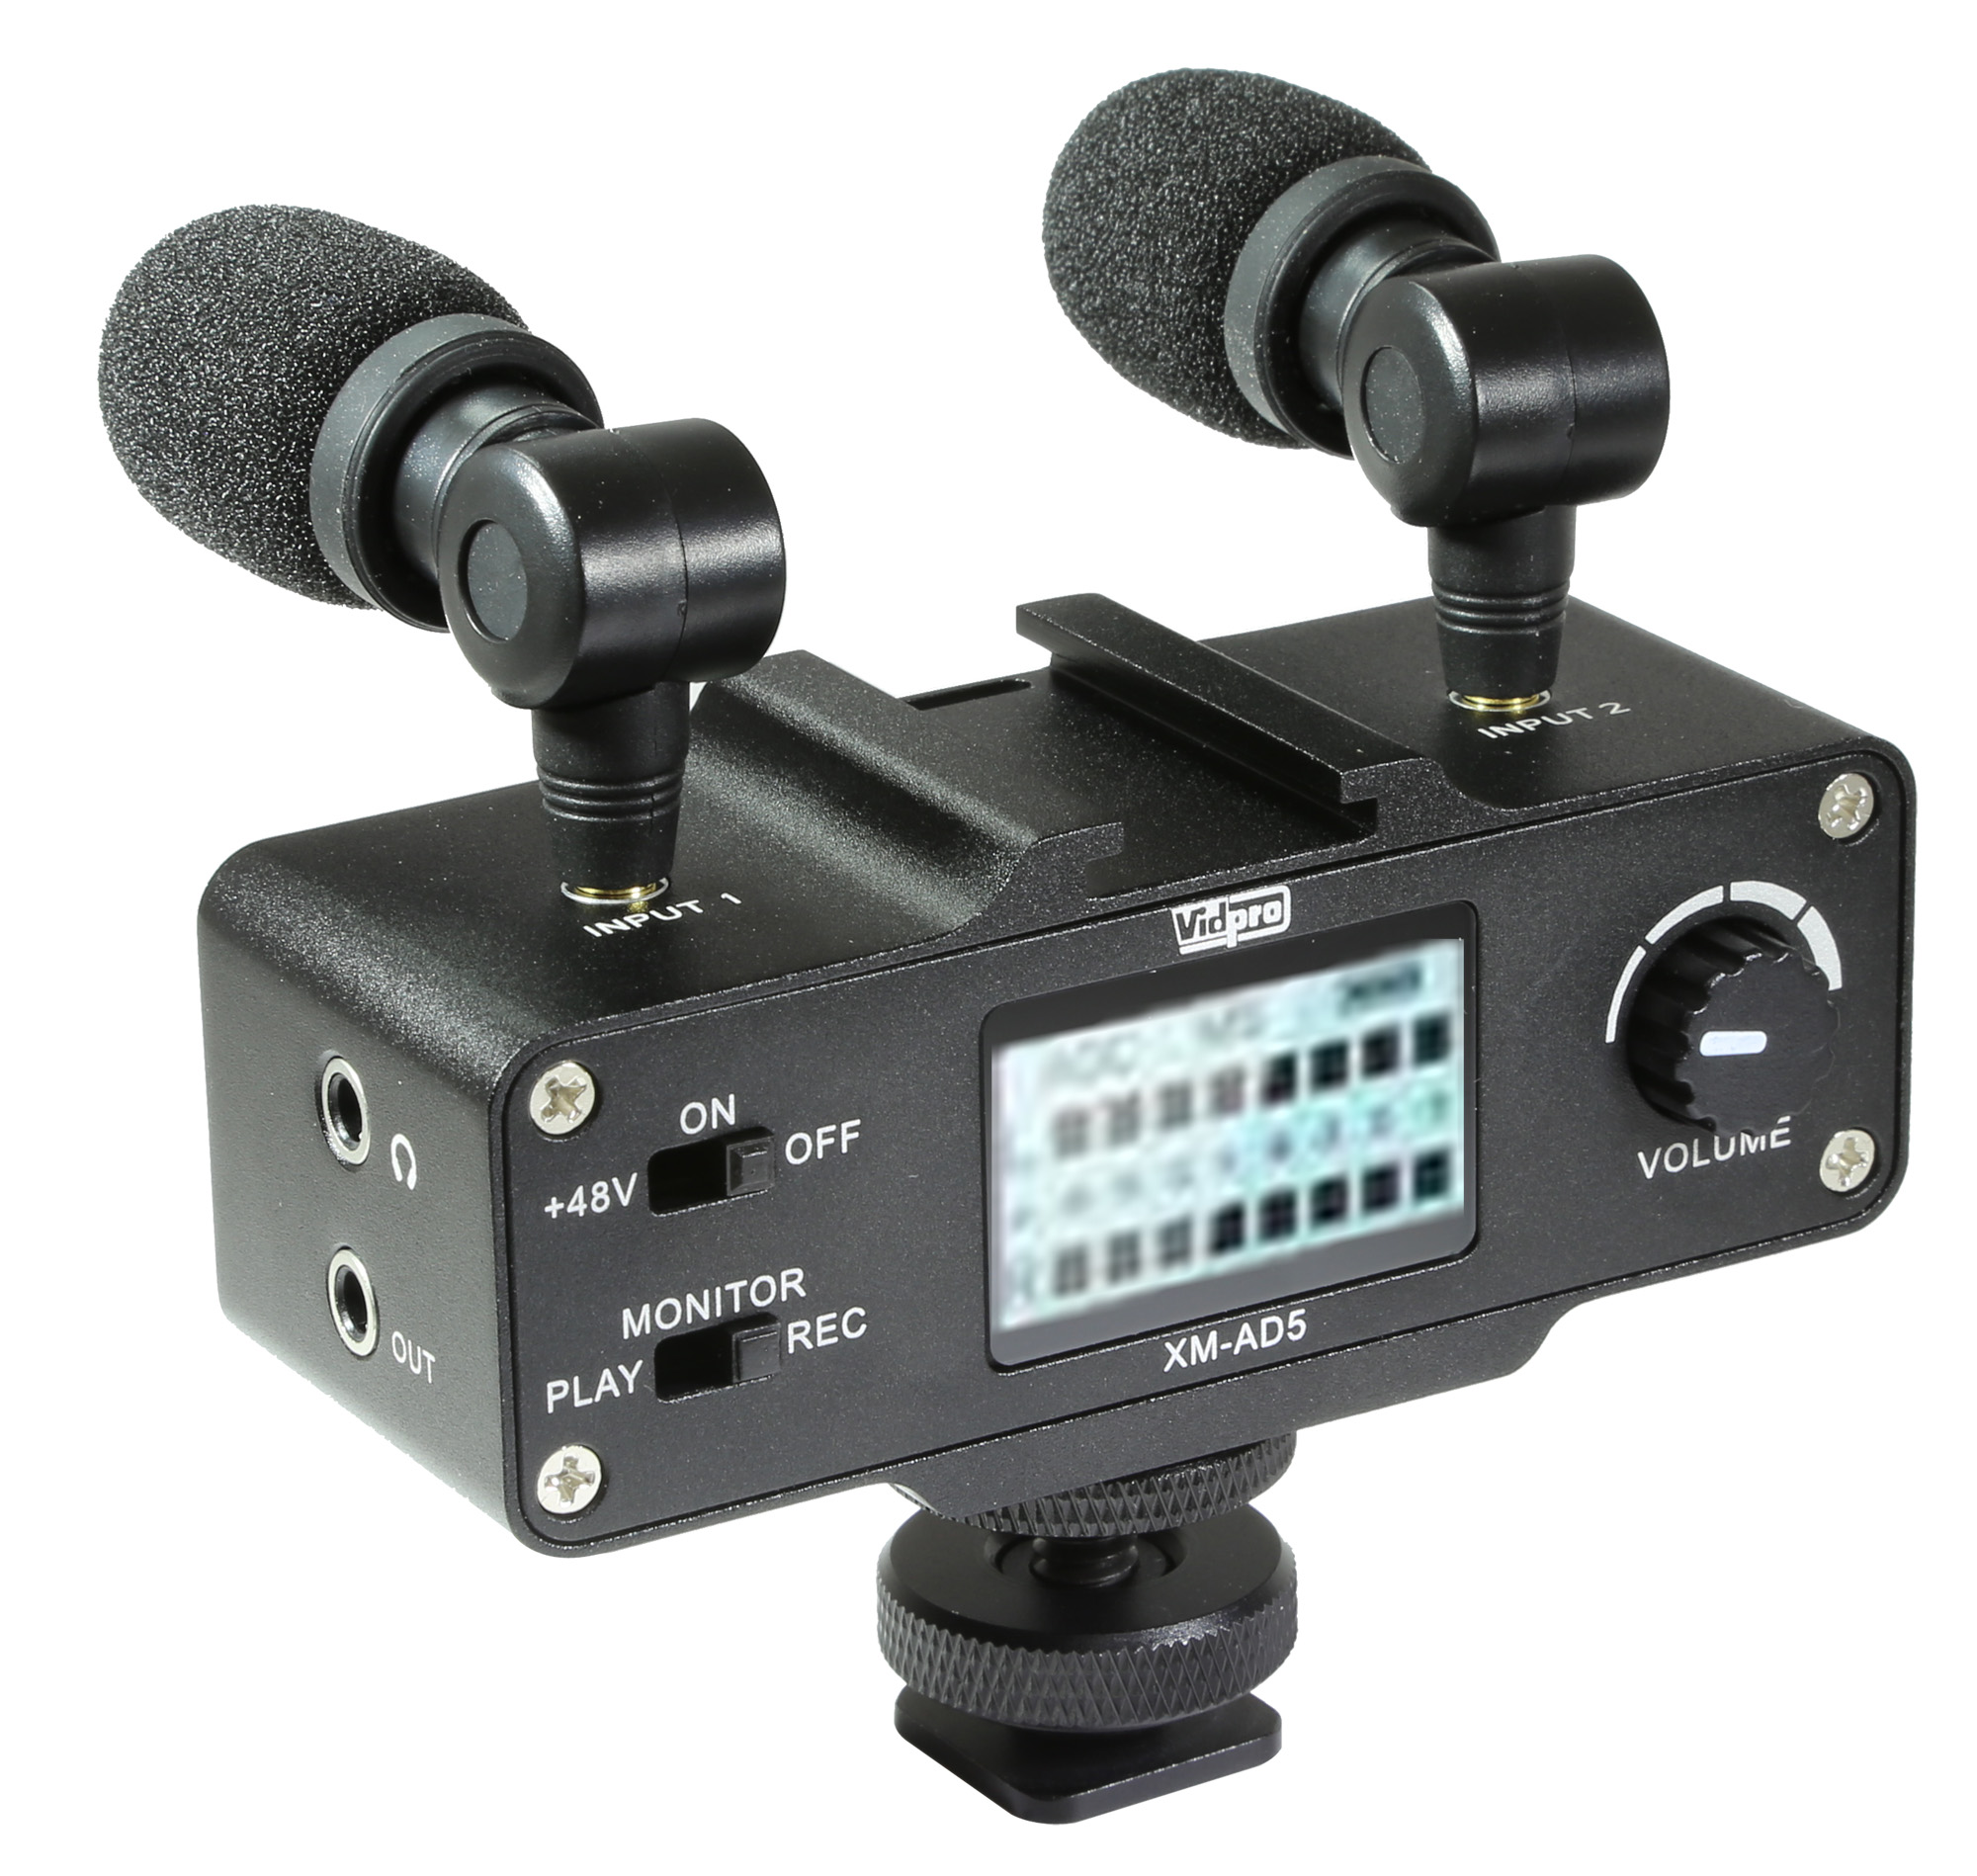 External Microphone for Panasonic HDC-SD600 Camcorder